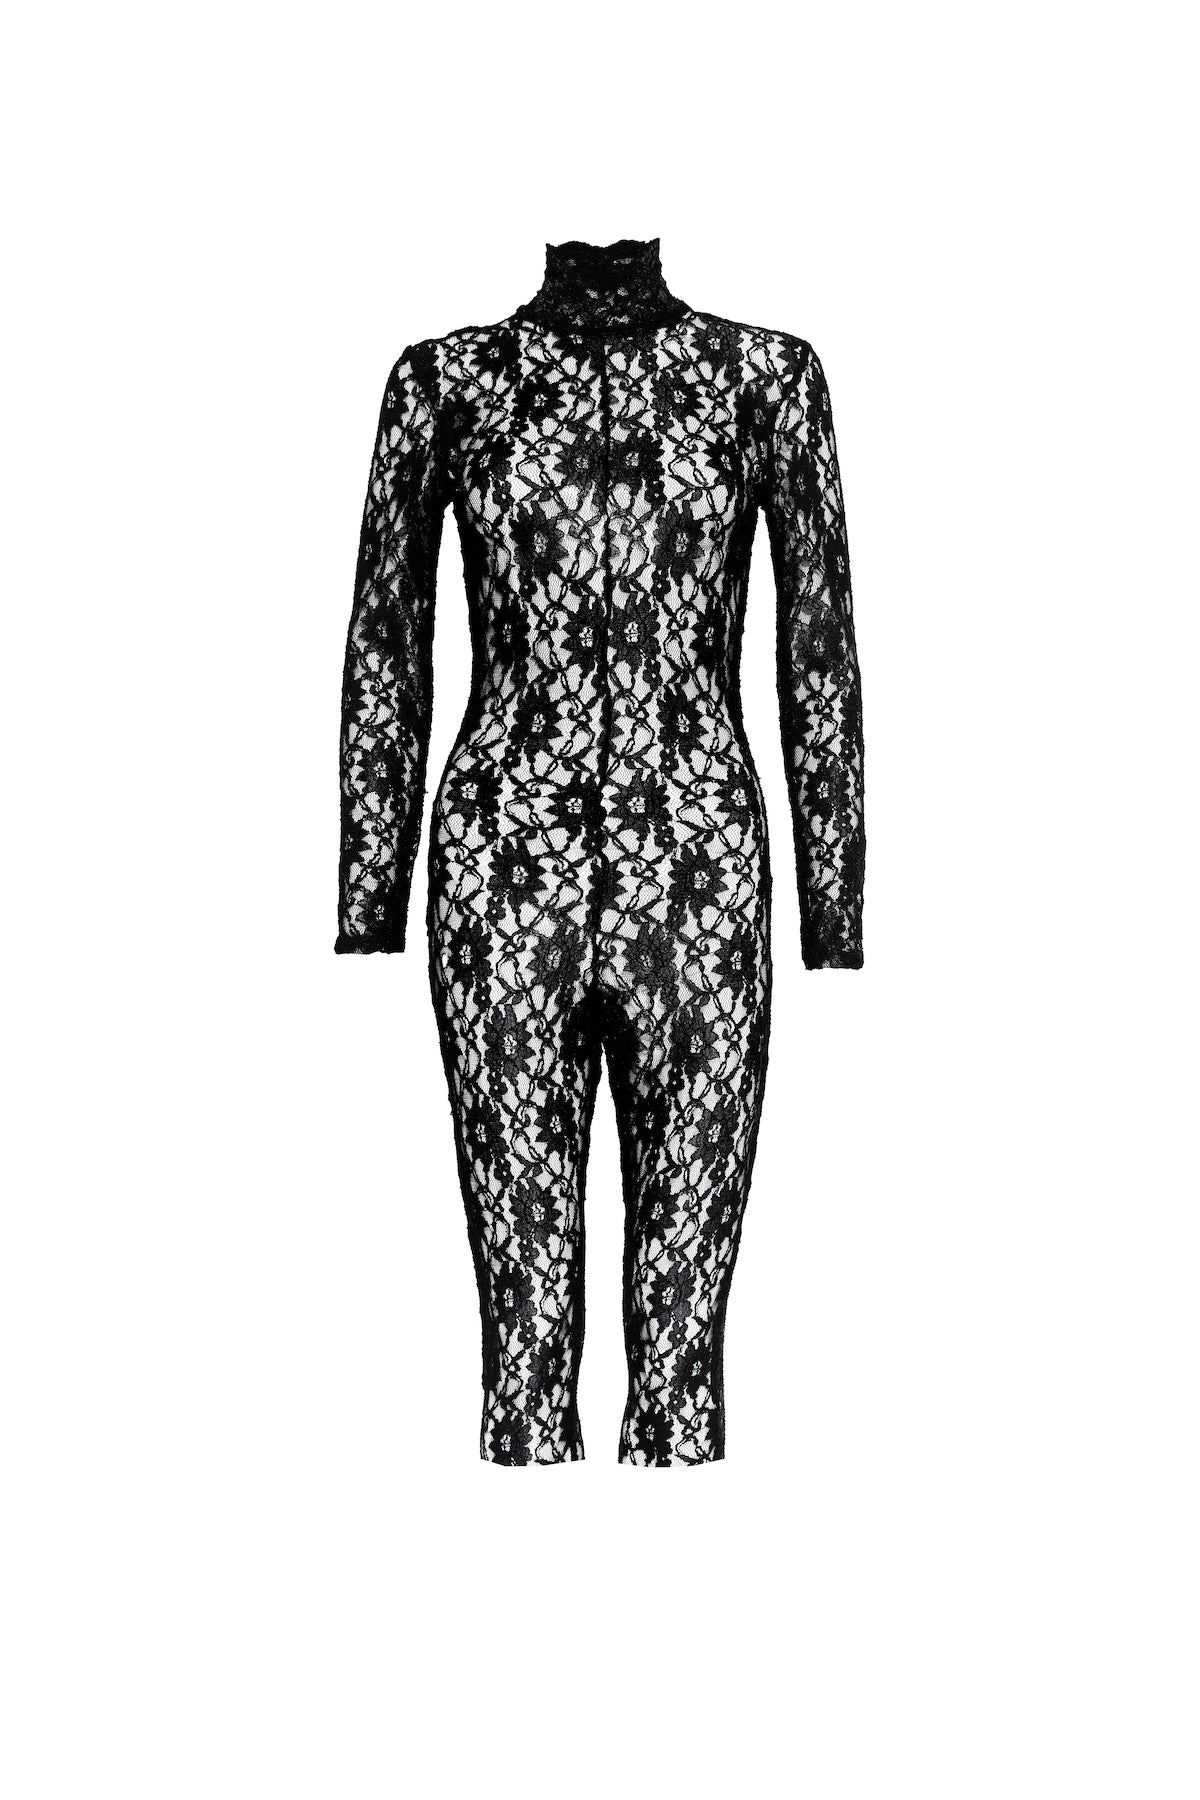 Wicked Lace Catsuit Short - Sarah Regensburger